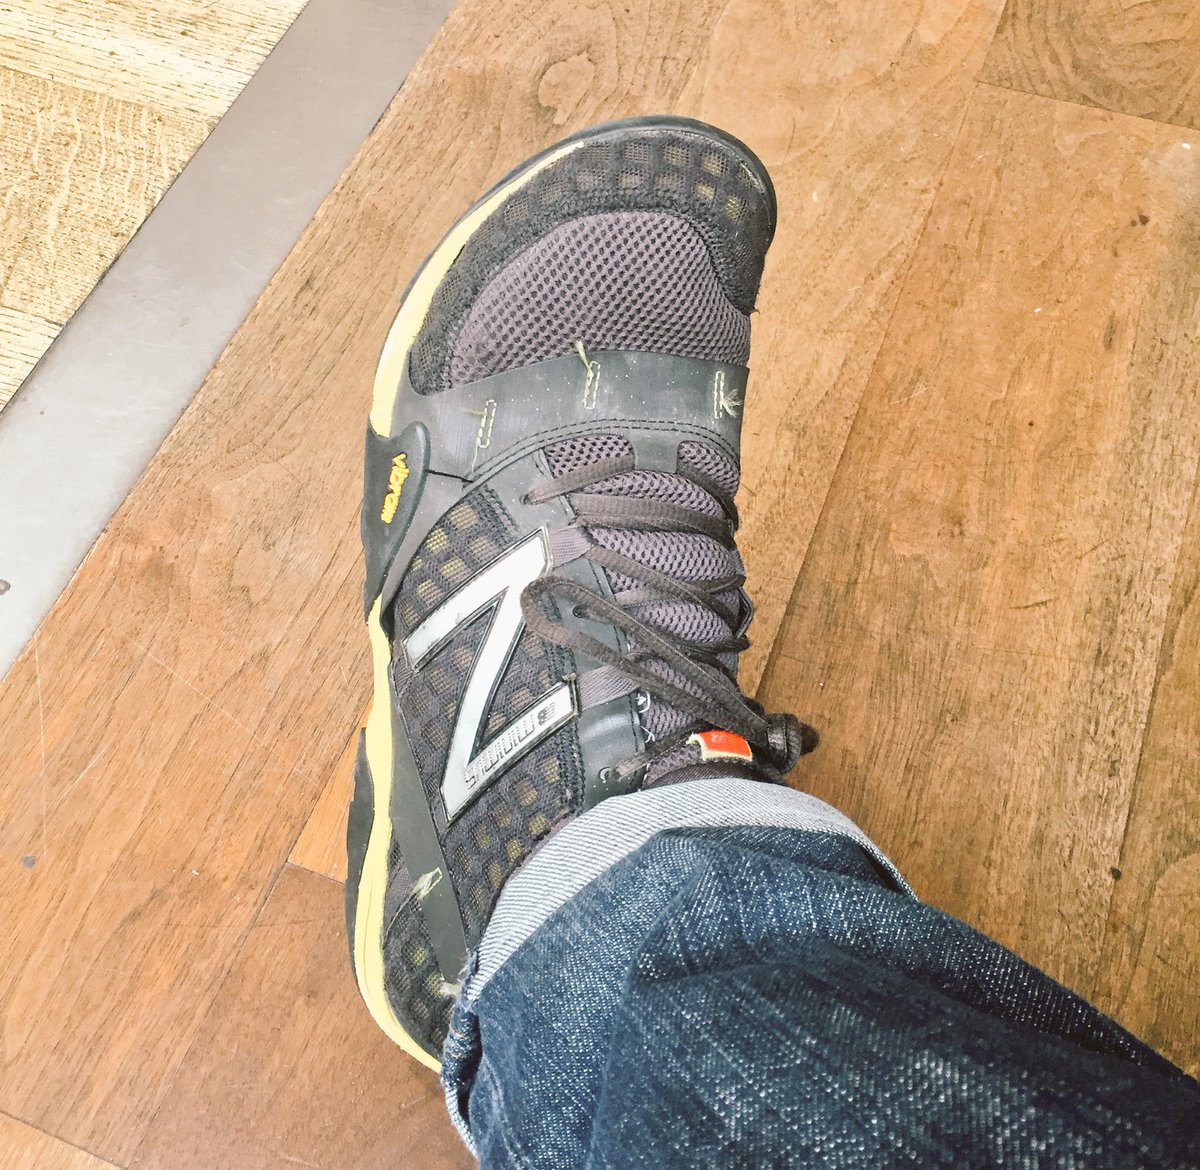 ignacioriesco: These sneakers have been my #RoadToImagine companions in the last 4 editions #imaginefacts https://t.co/apcK3Atfq1